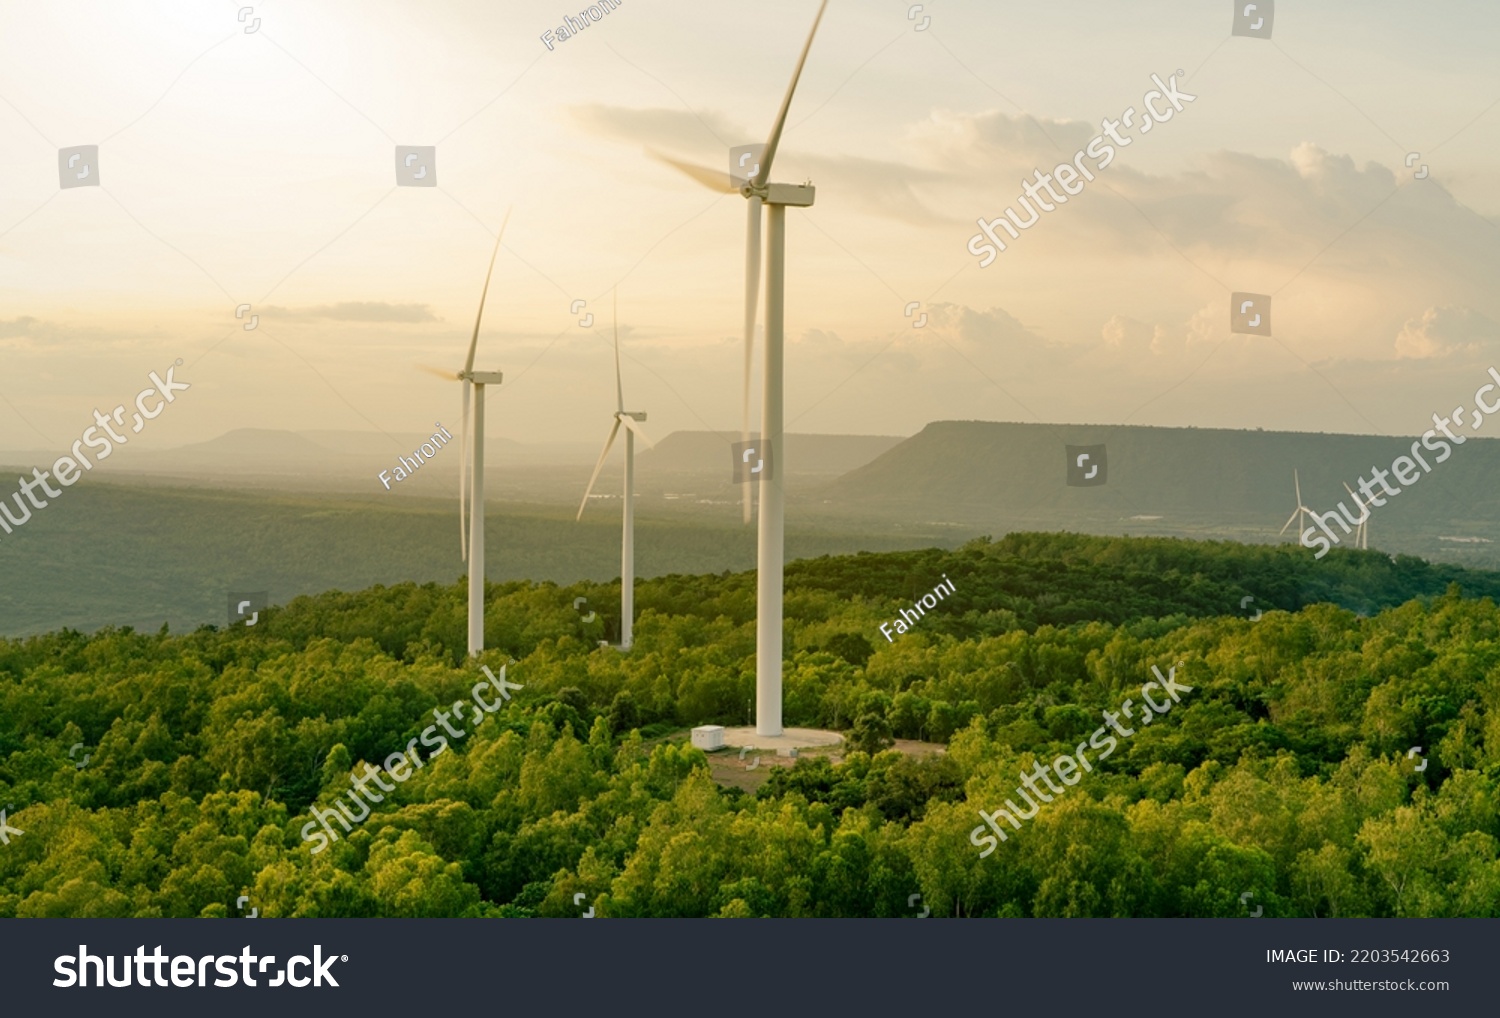 Selective focus on wind farm. Wind energy. Wind power. Sustainable, renewable energy. Wind turbines generate electricity. Windmill farm on mountain. Green technology. Sustainable resources. #2203542663